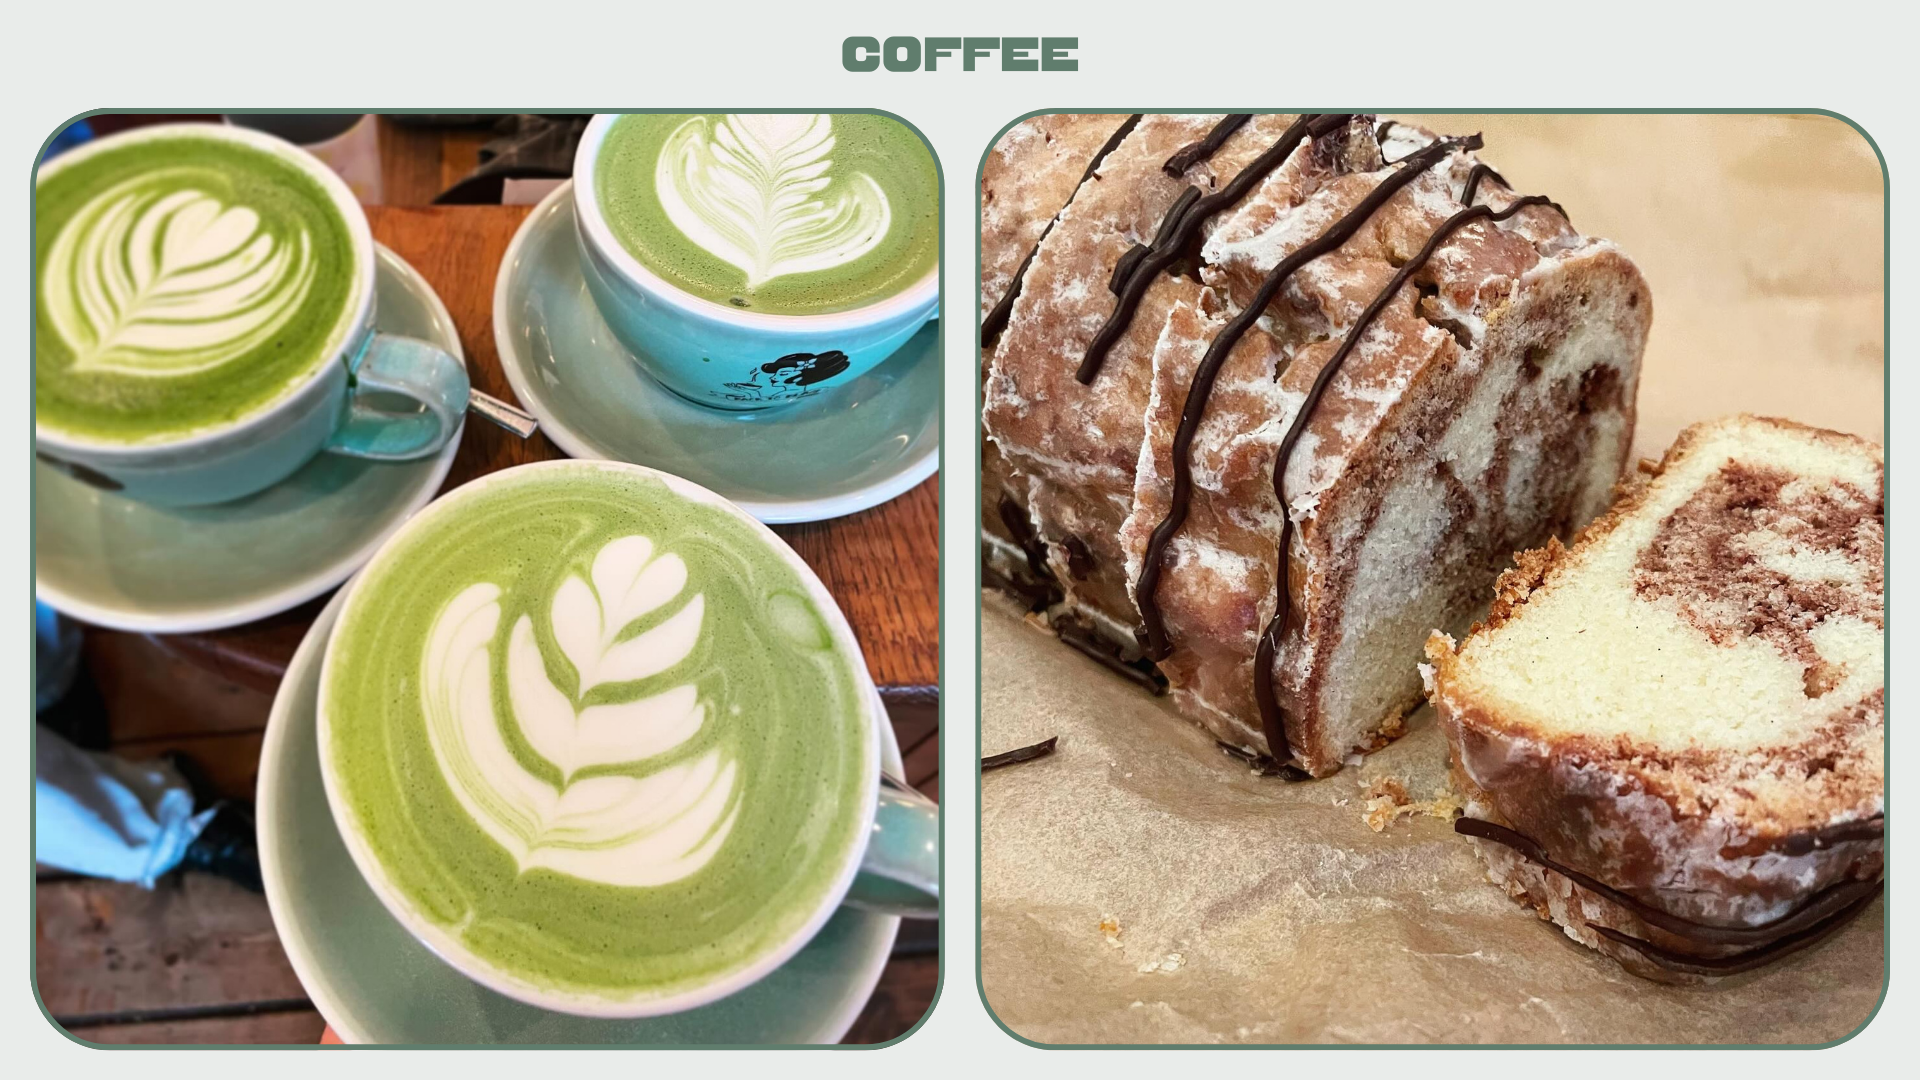 Matcha lattes and cakes from a coffee shop and bakery in Amsterdam